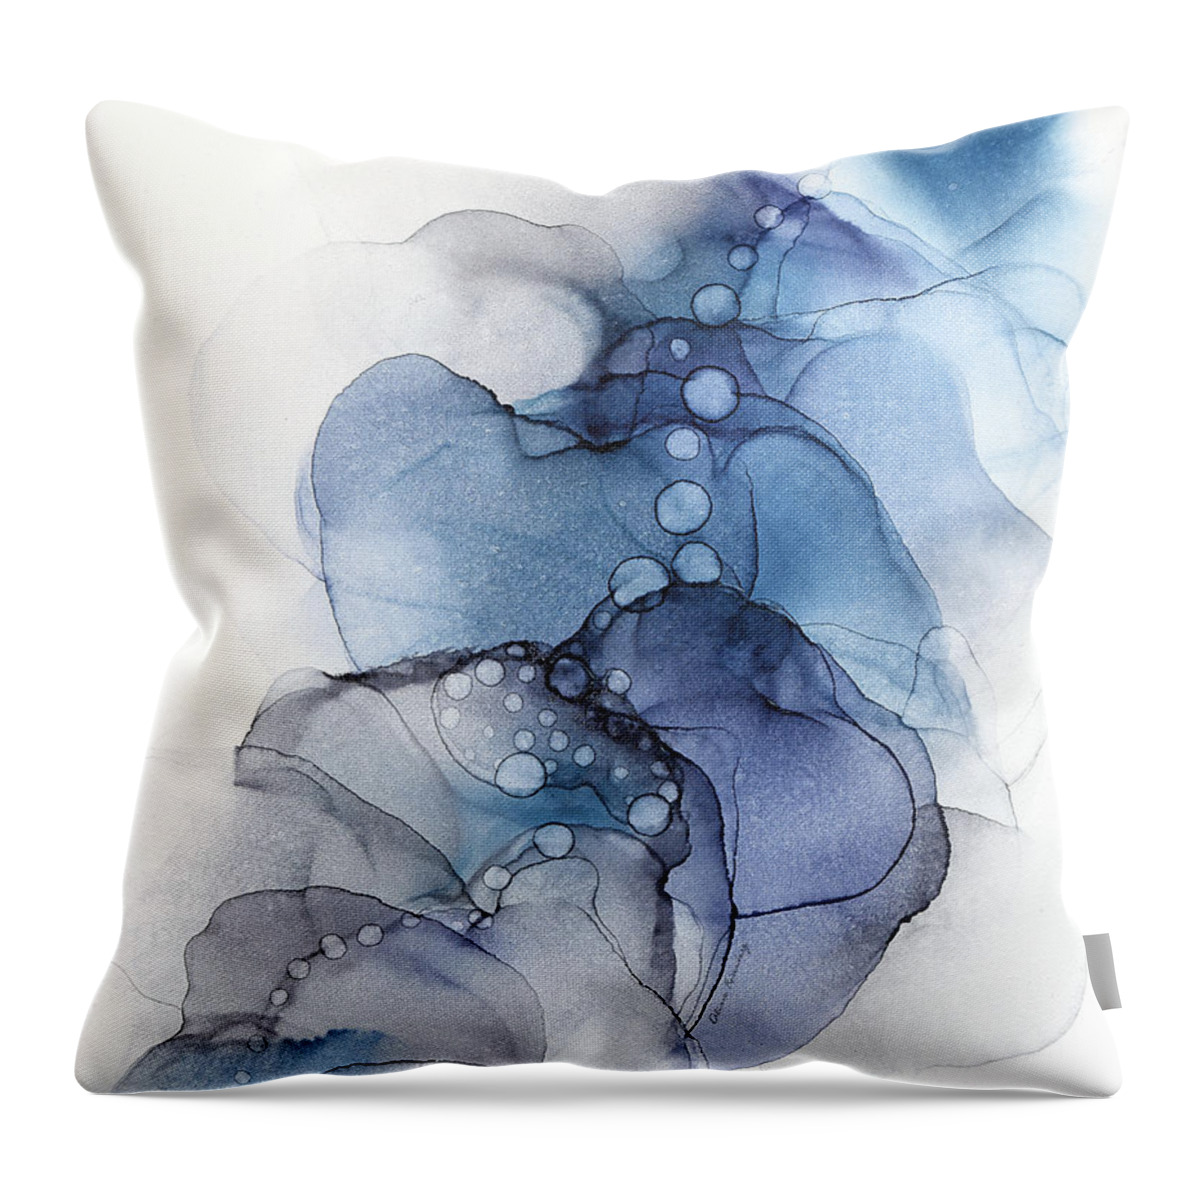 Alcohol Ink Throw Pillow featuring the painting Blue Petal Dots Whispy Abstract Painting by Alissa Beth Photography